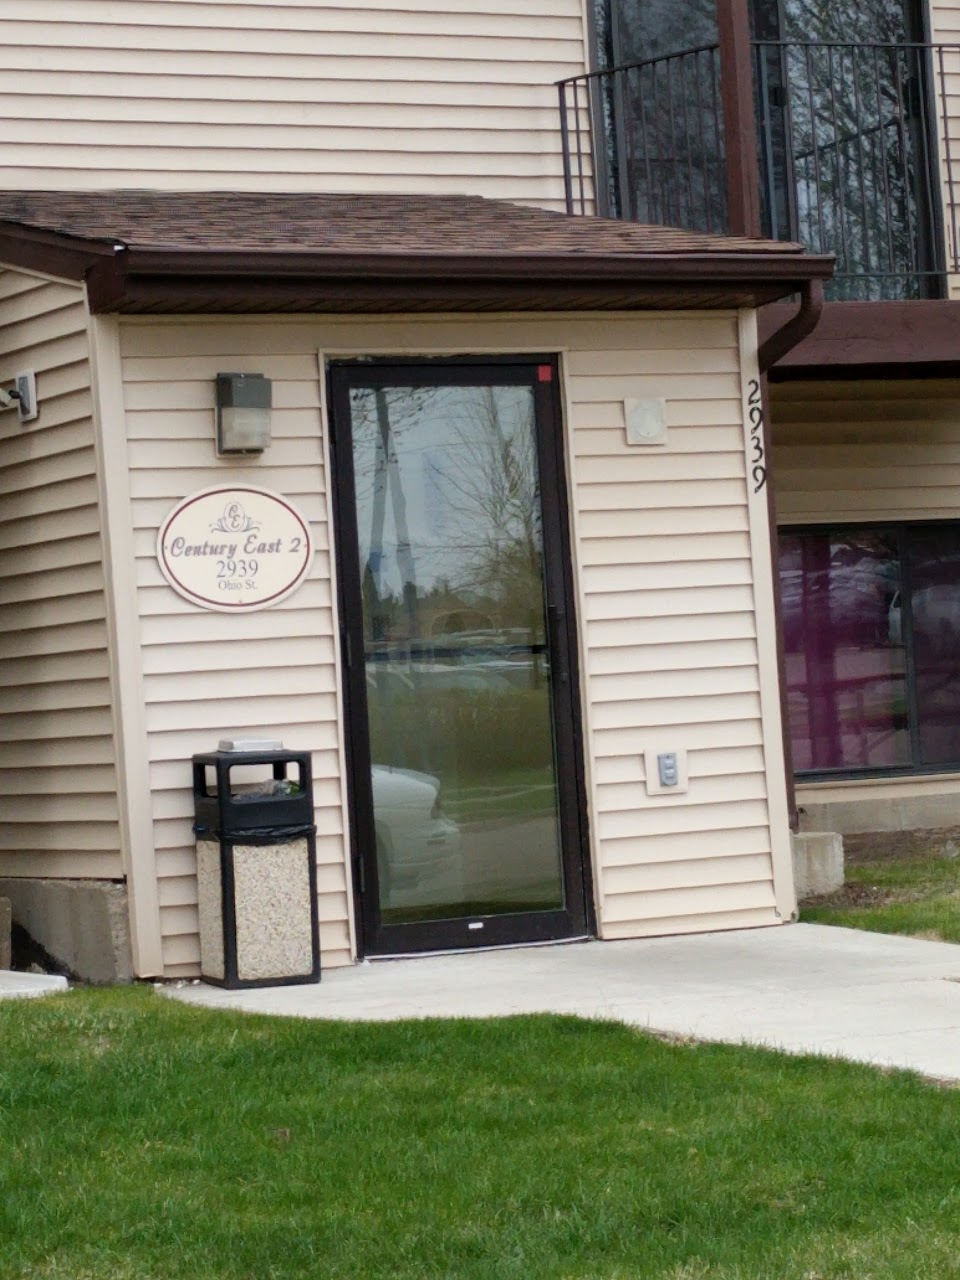 Photo of CENTURY EAST II APTS. Affordable housing located at 2939 OHIO ST BISMARCK, ND 58503